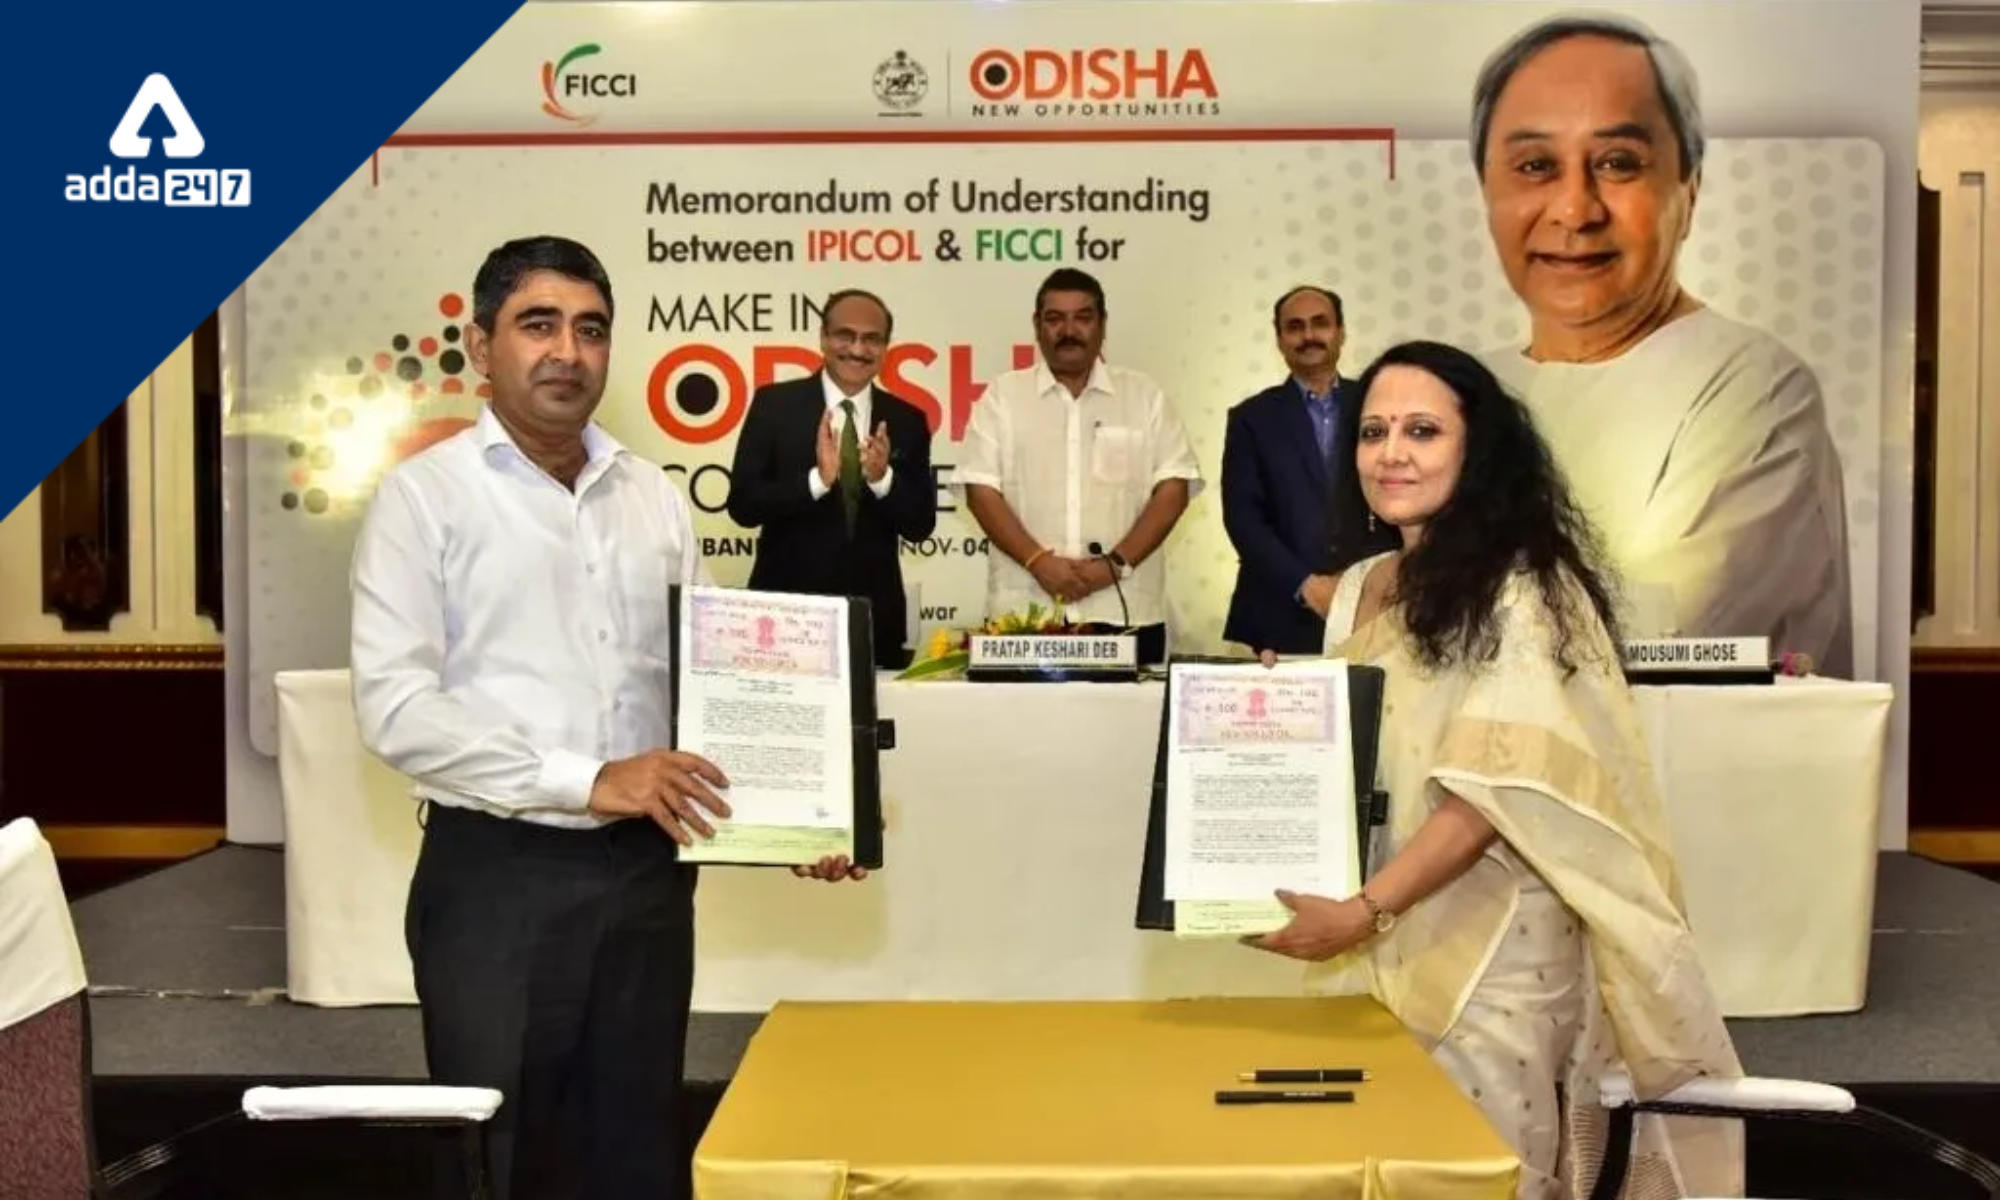 For next “Make in Odisha” summit in 2022, Odisha and FICCI ink an MoU